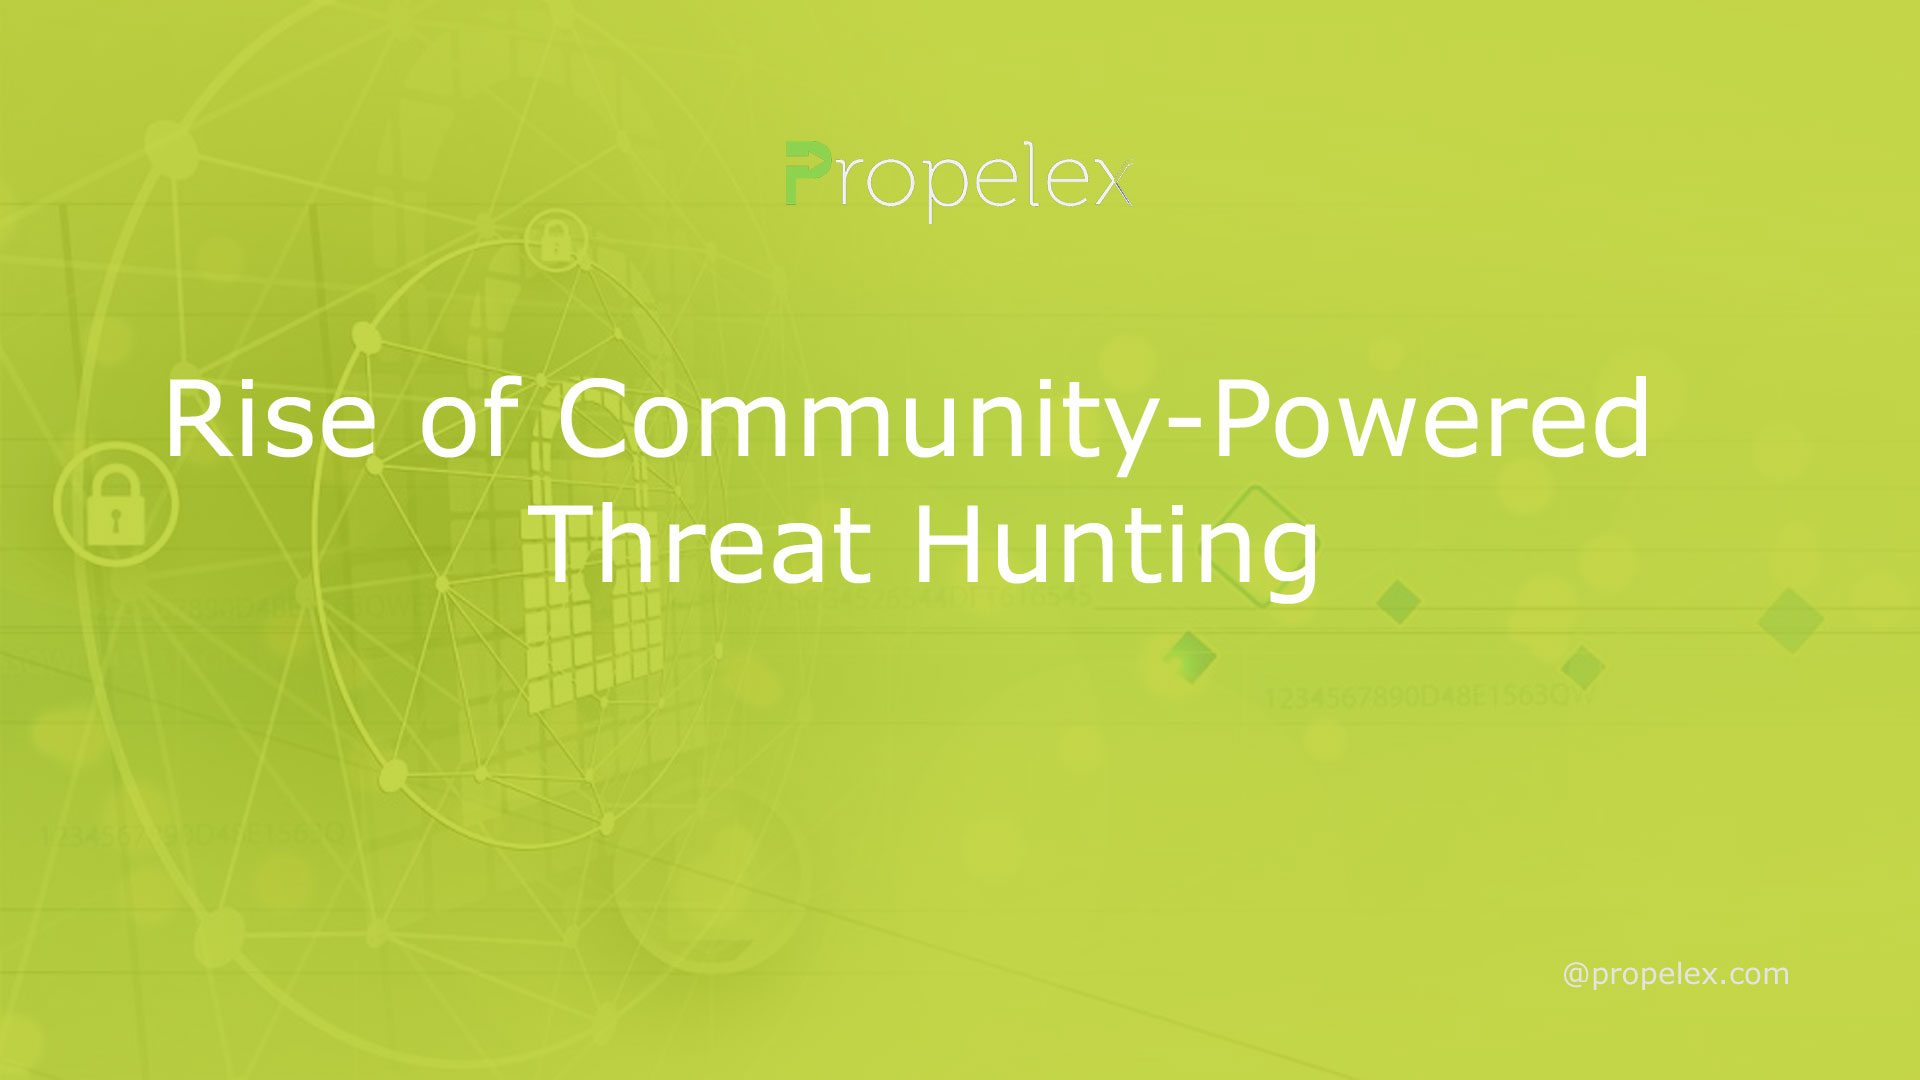 The Rise of Community-Powered Threat Hunting